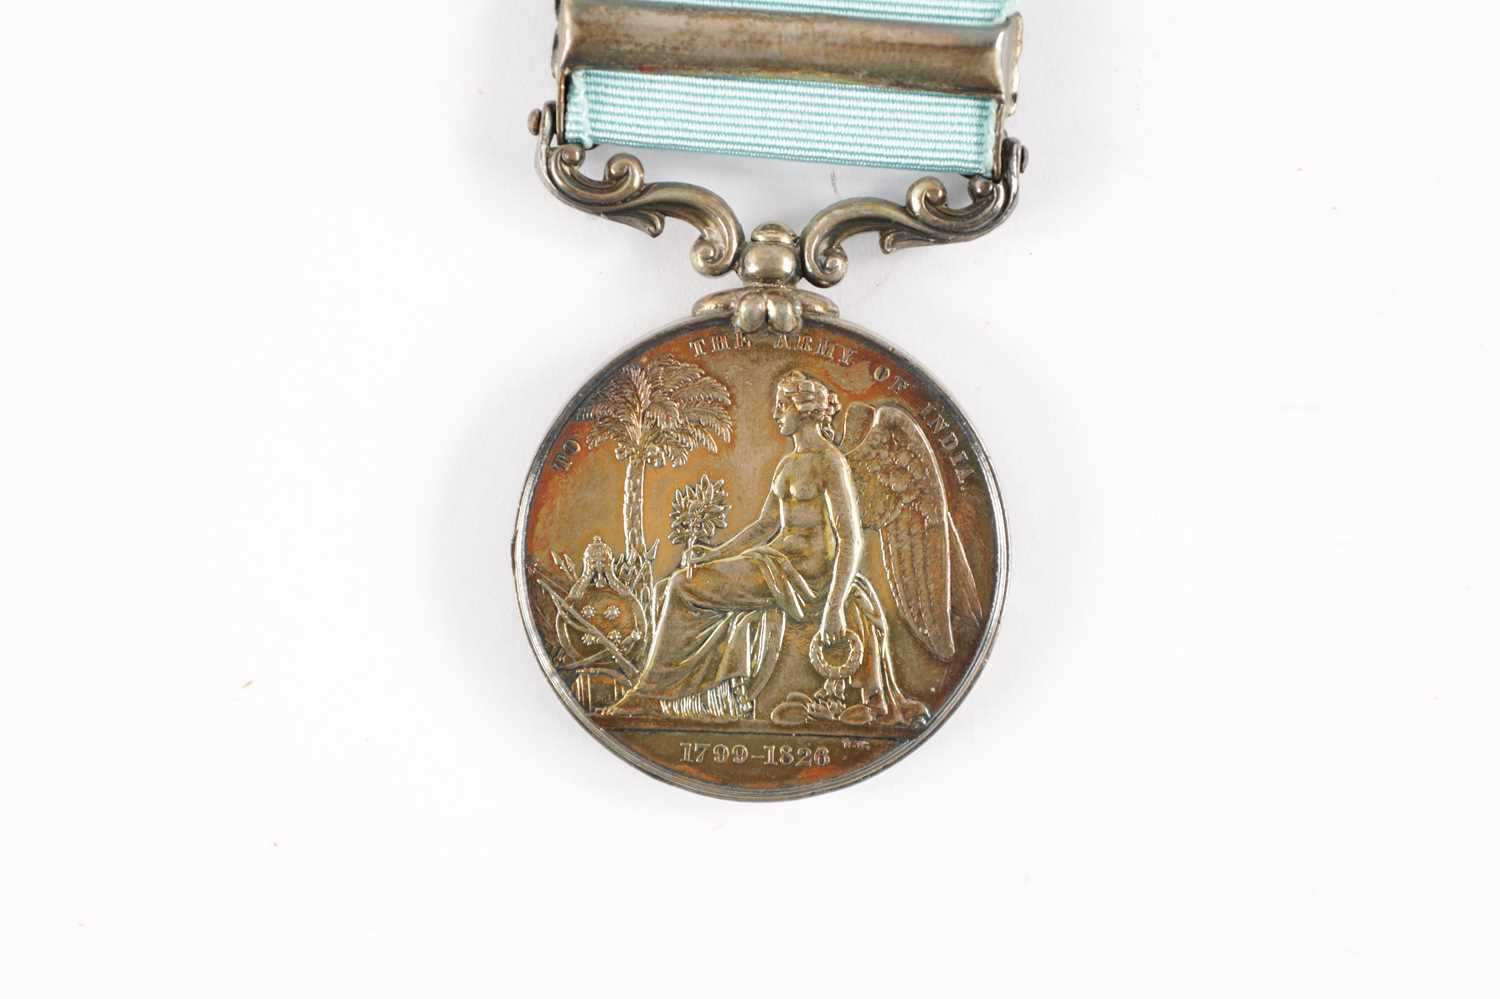 AN ARMY OF INDIA MEDAL 1799-1826, WITH ‘AVA’ CLASP - Image 4 of 7